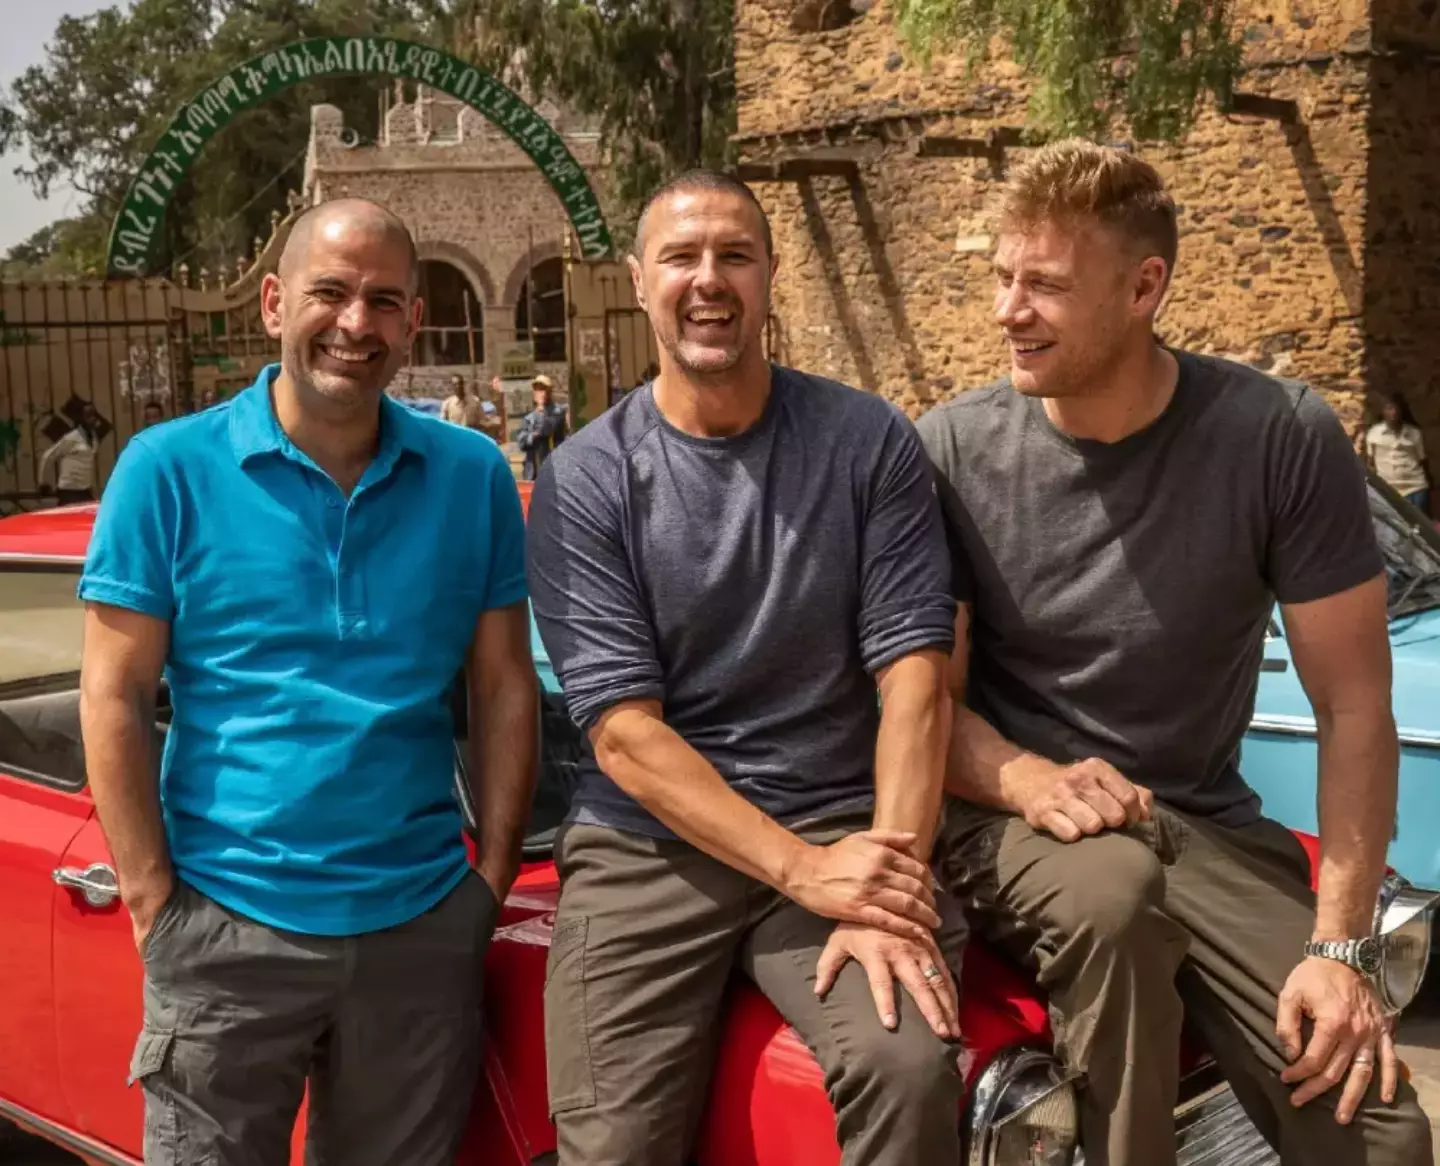 Flintoff worked as co-presenter on Top Gear with Chris Harris and Paddy McGuinness.